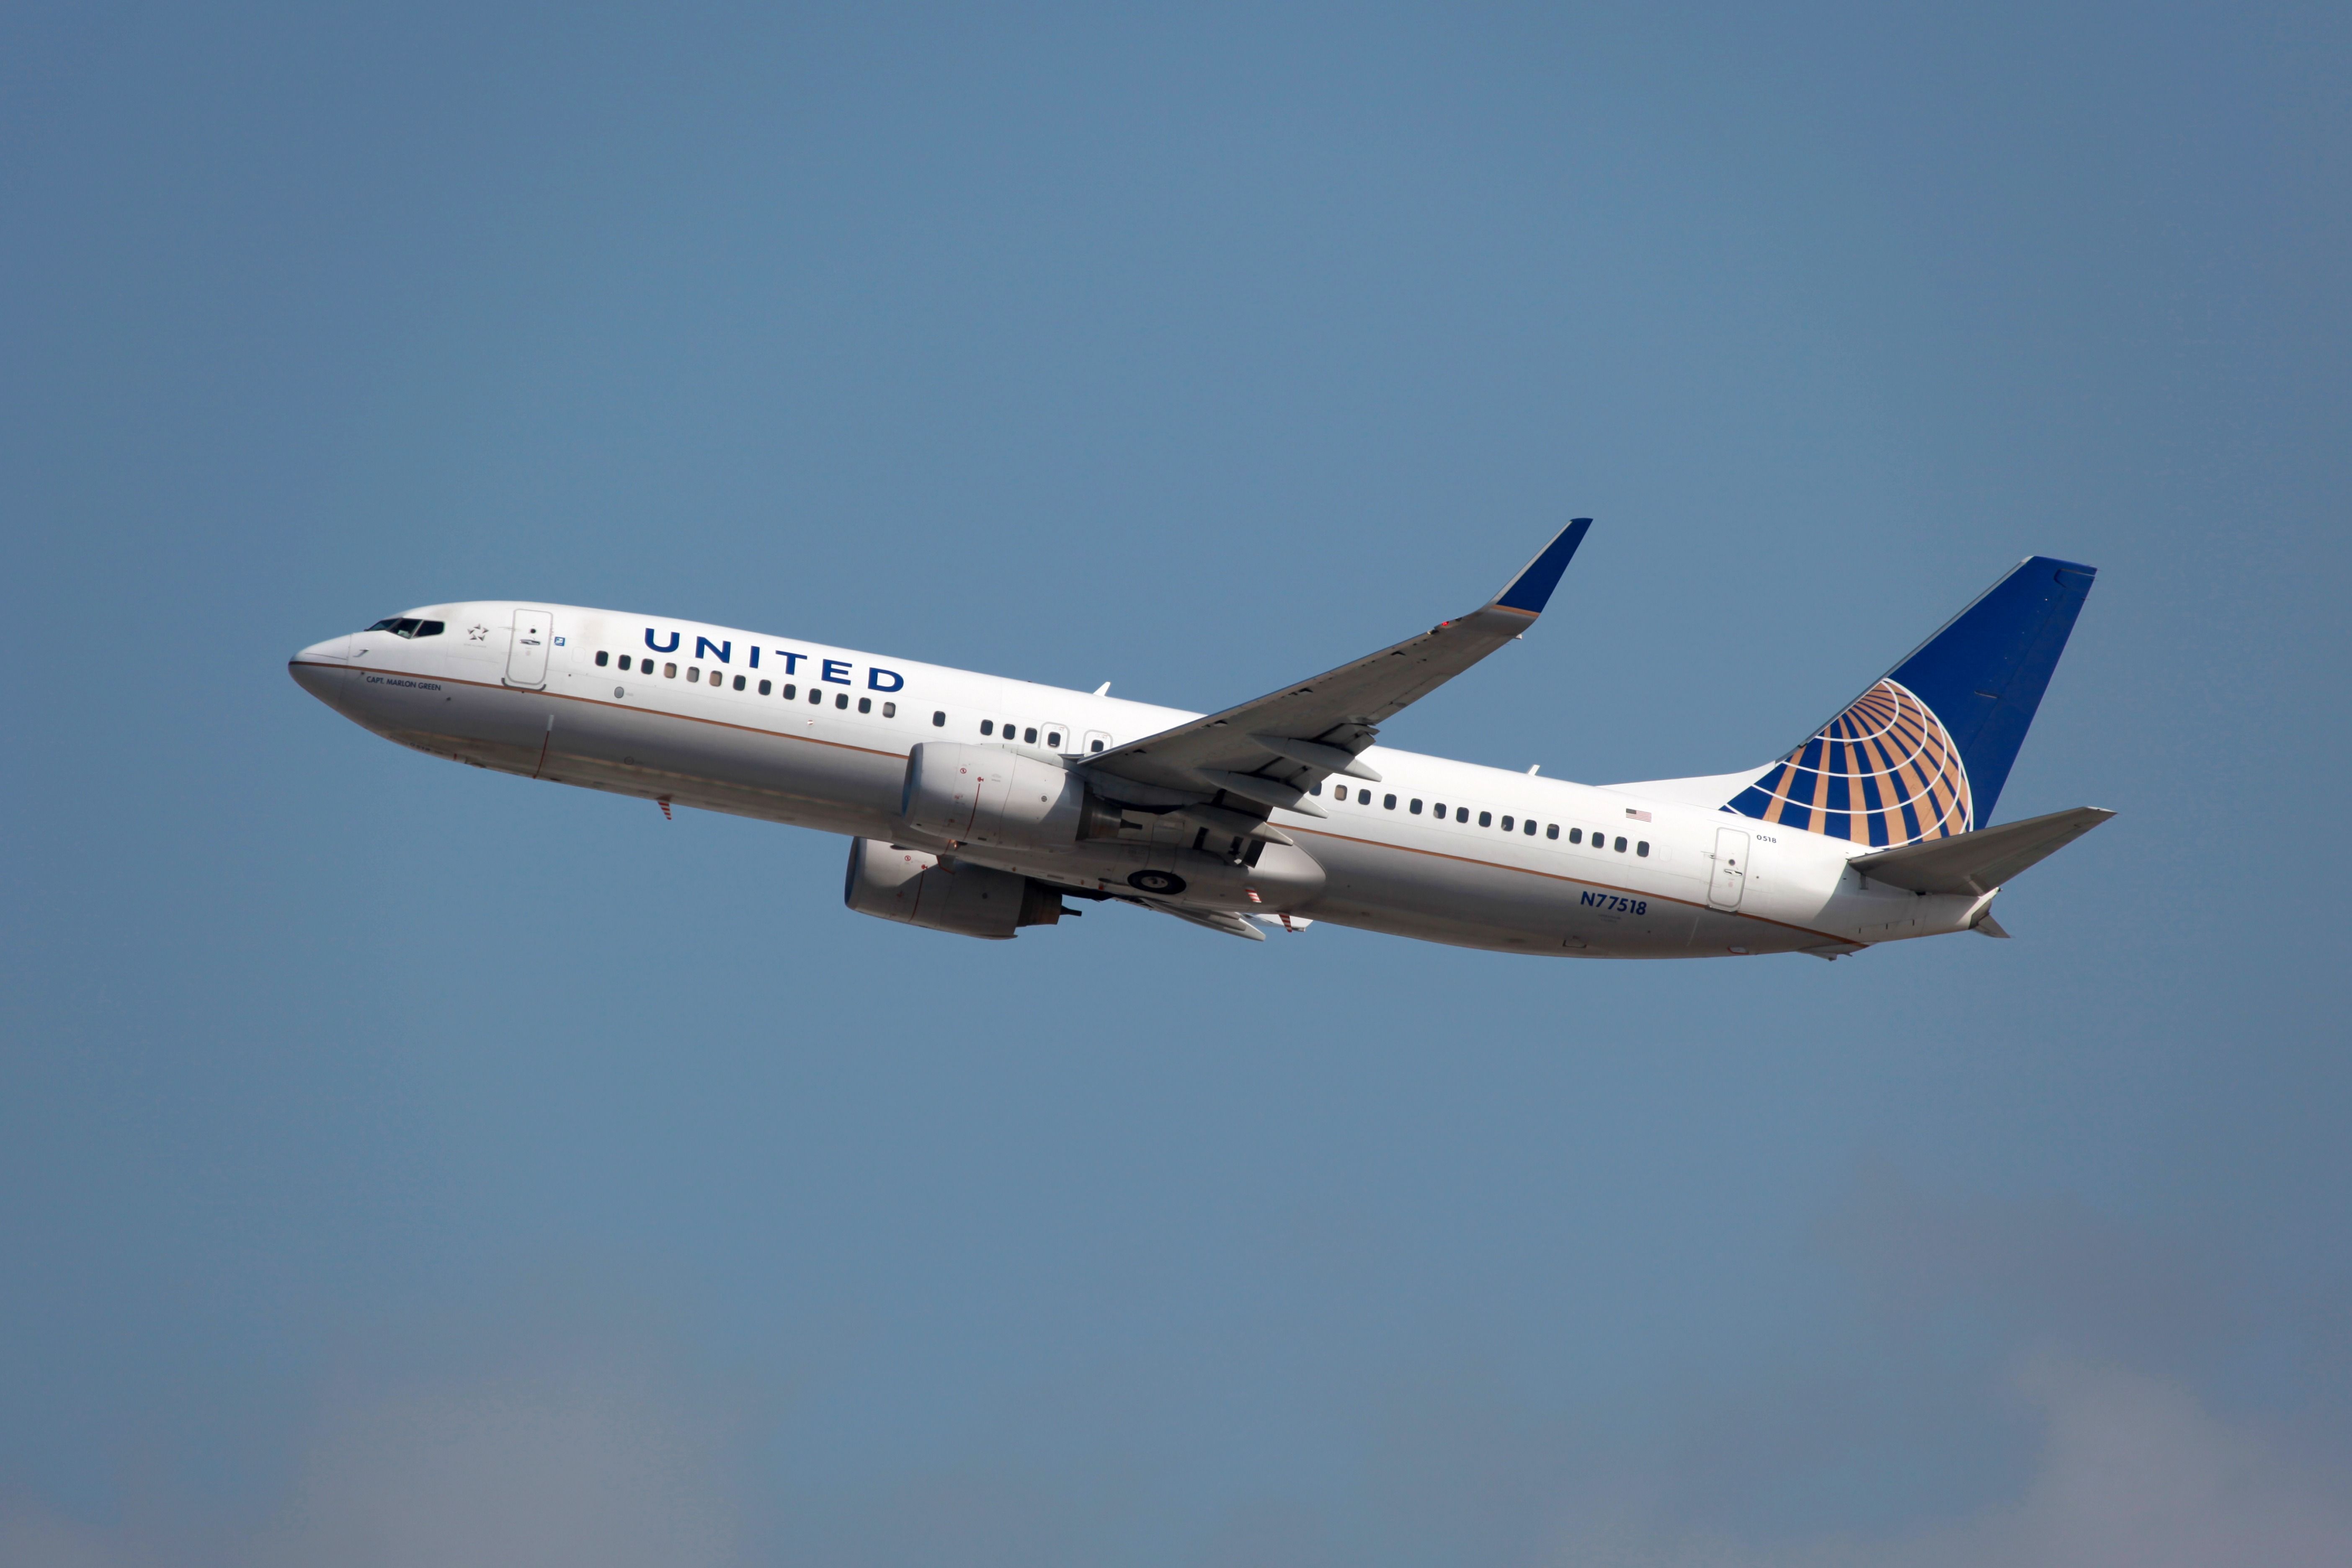 A United Airlines Boeing 737-800 flying in the sky.